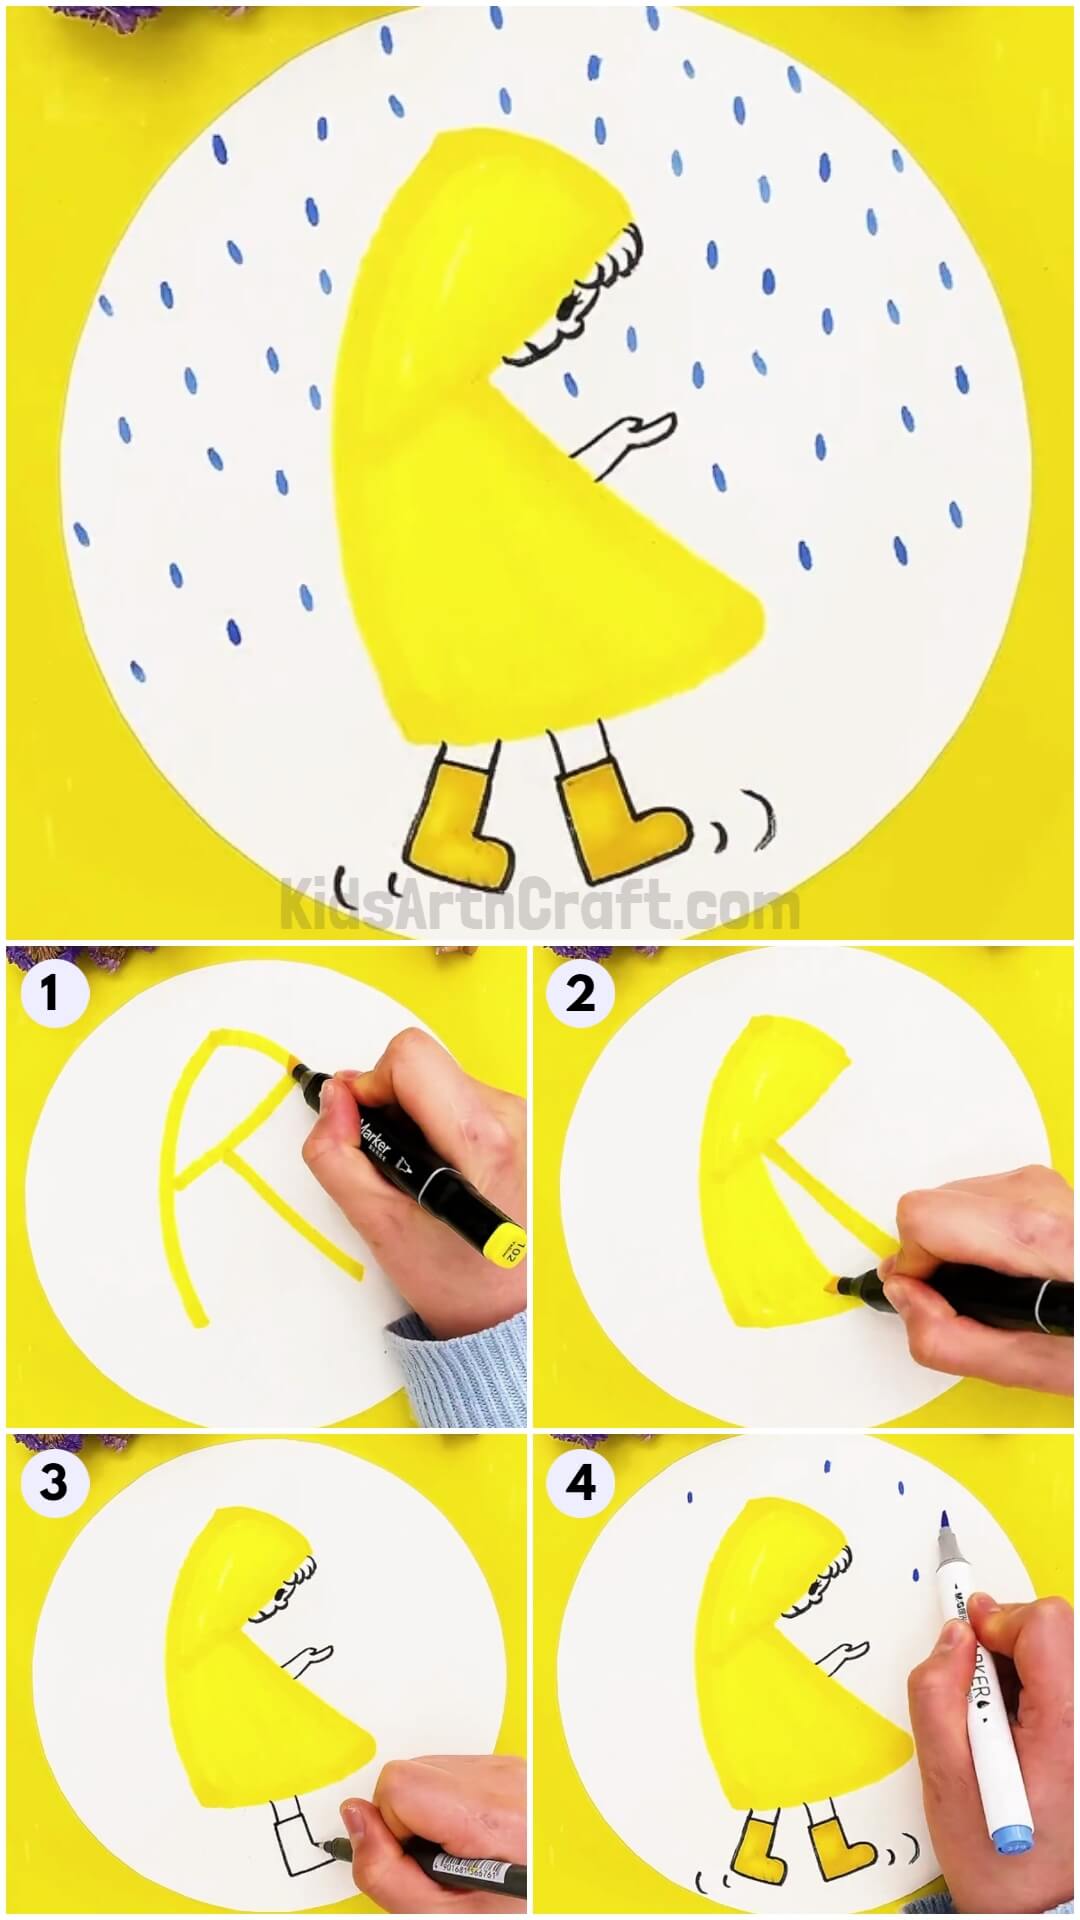 Cute Girl In Rain Drawing Step by Step Instructions